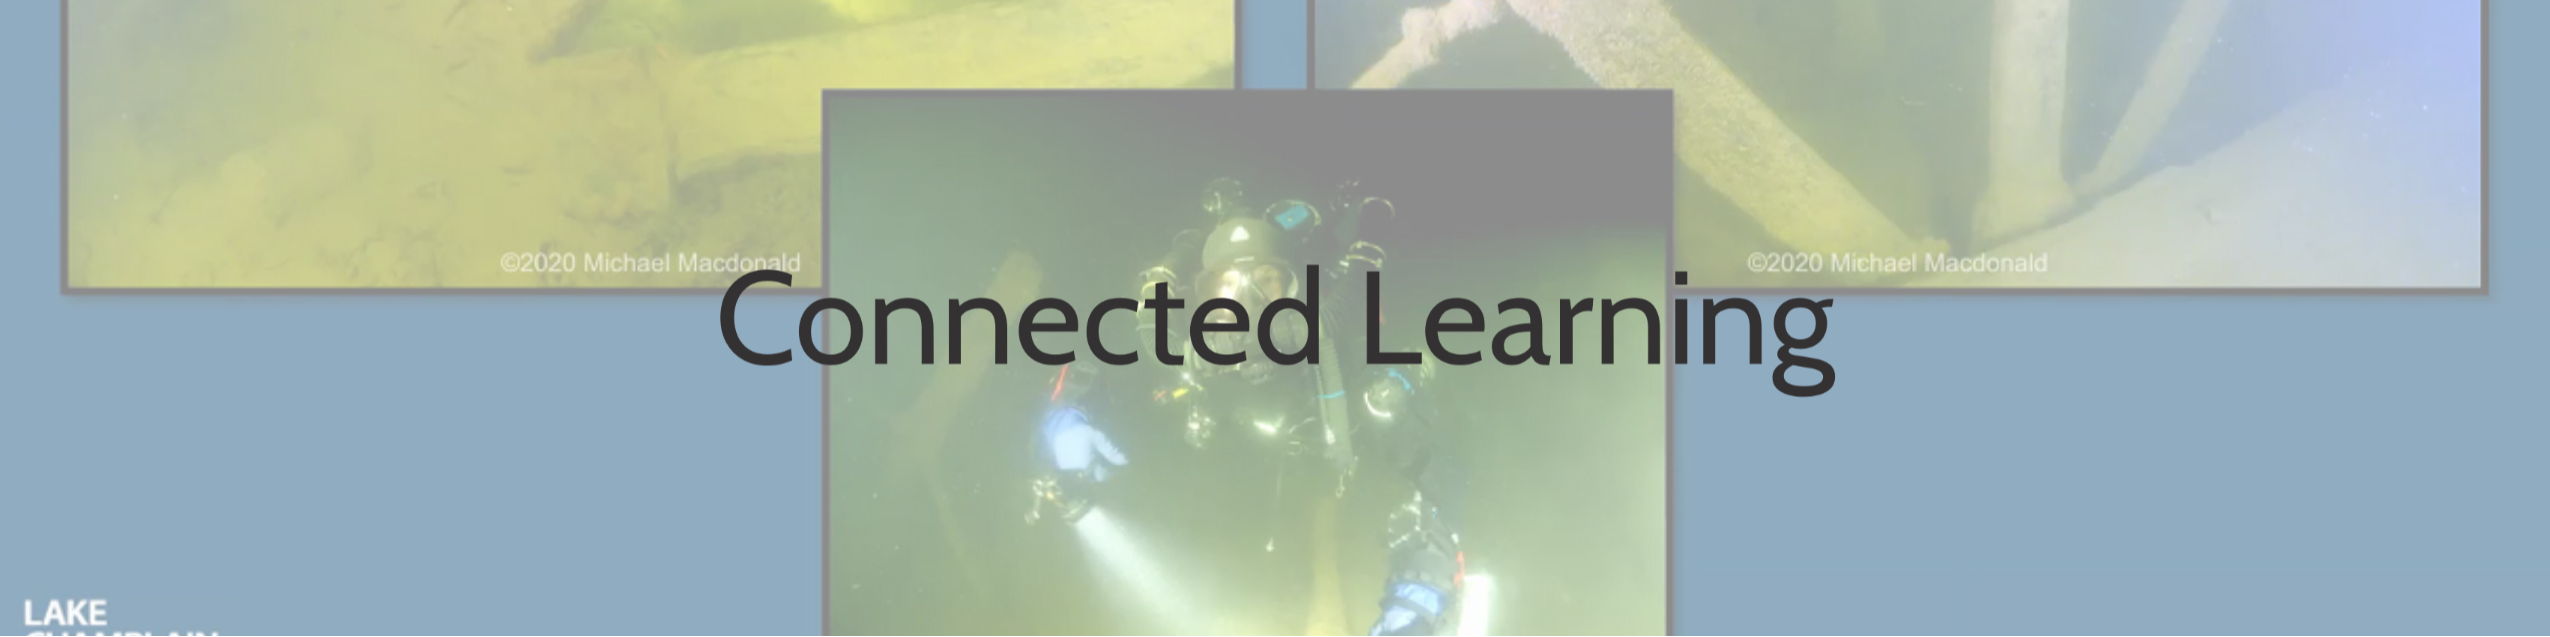 Connected learning